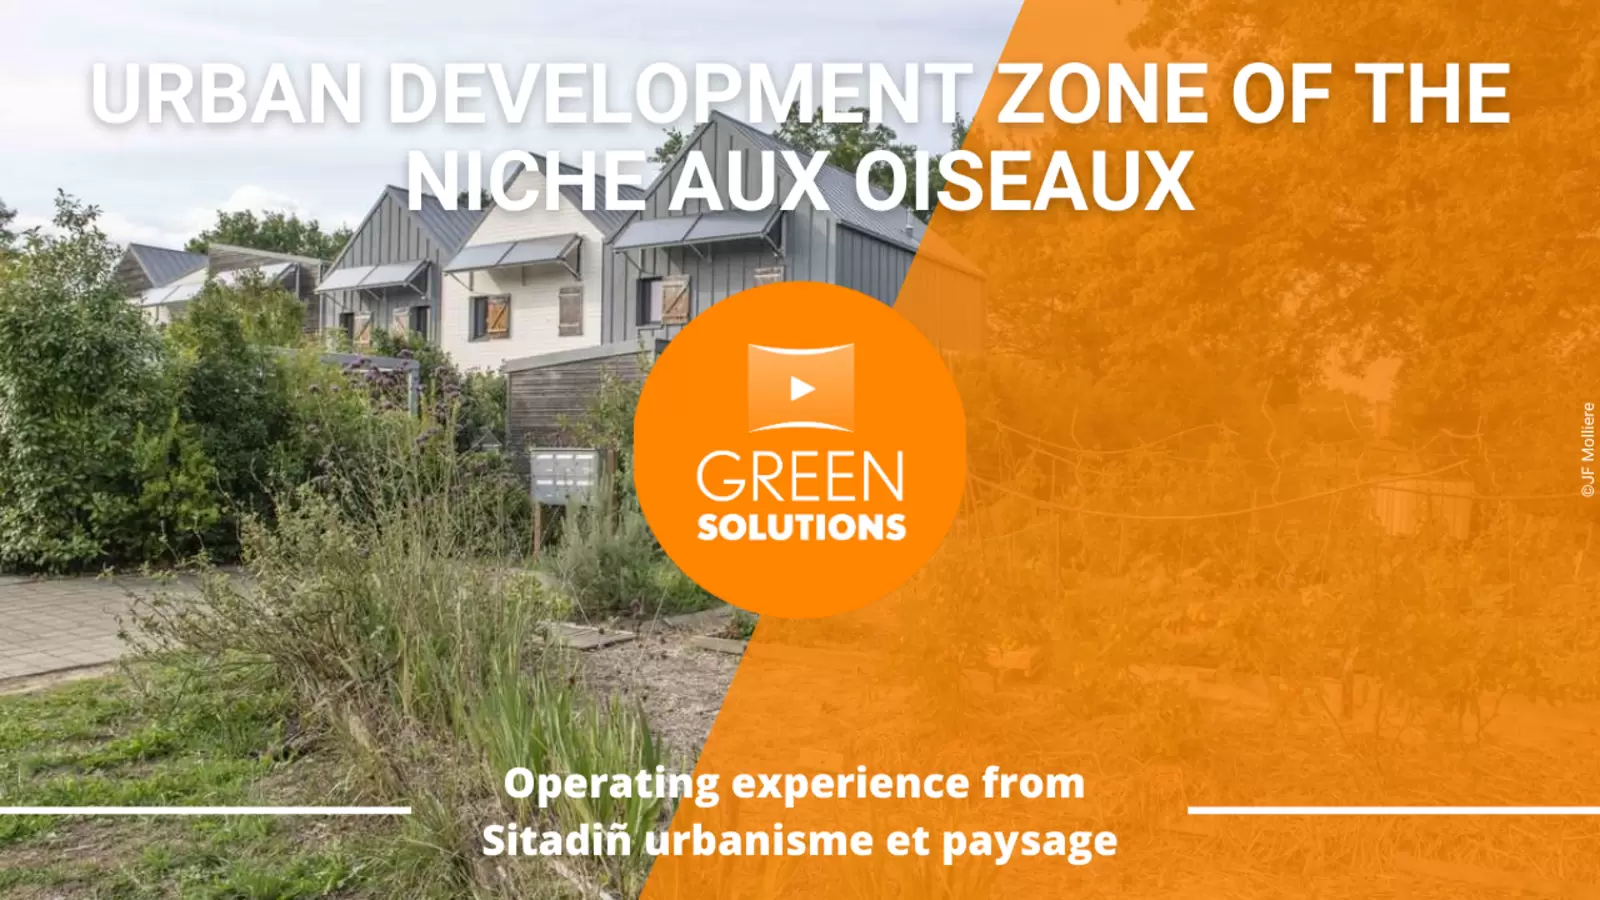 A new nest for more cohabitation with the living - Watch the video of the urban development zone of the Niche aux Oiseaux